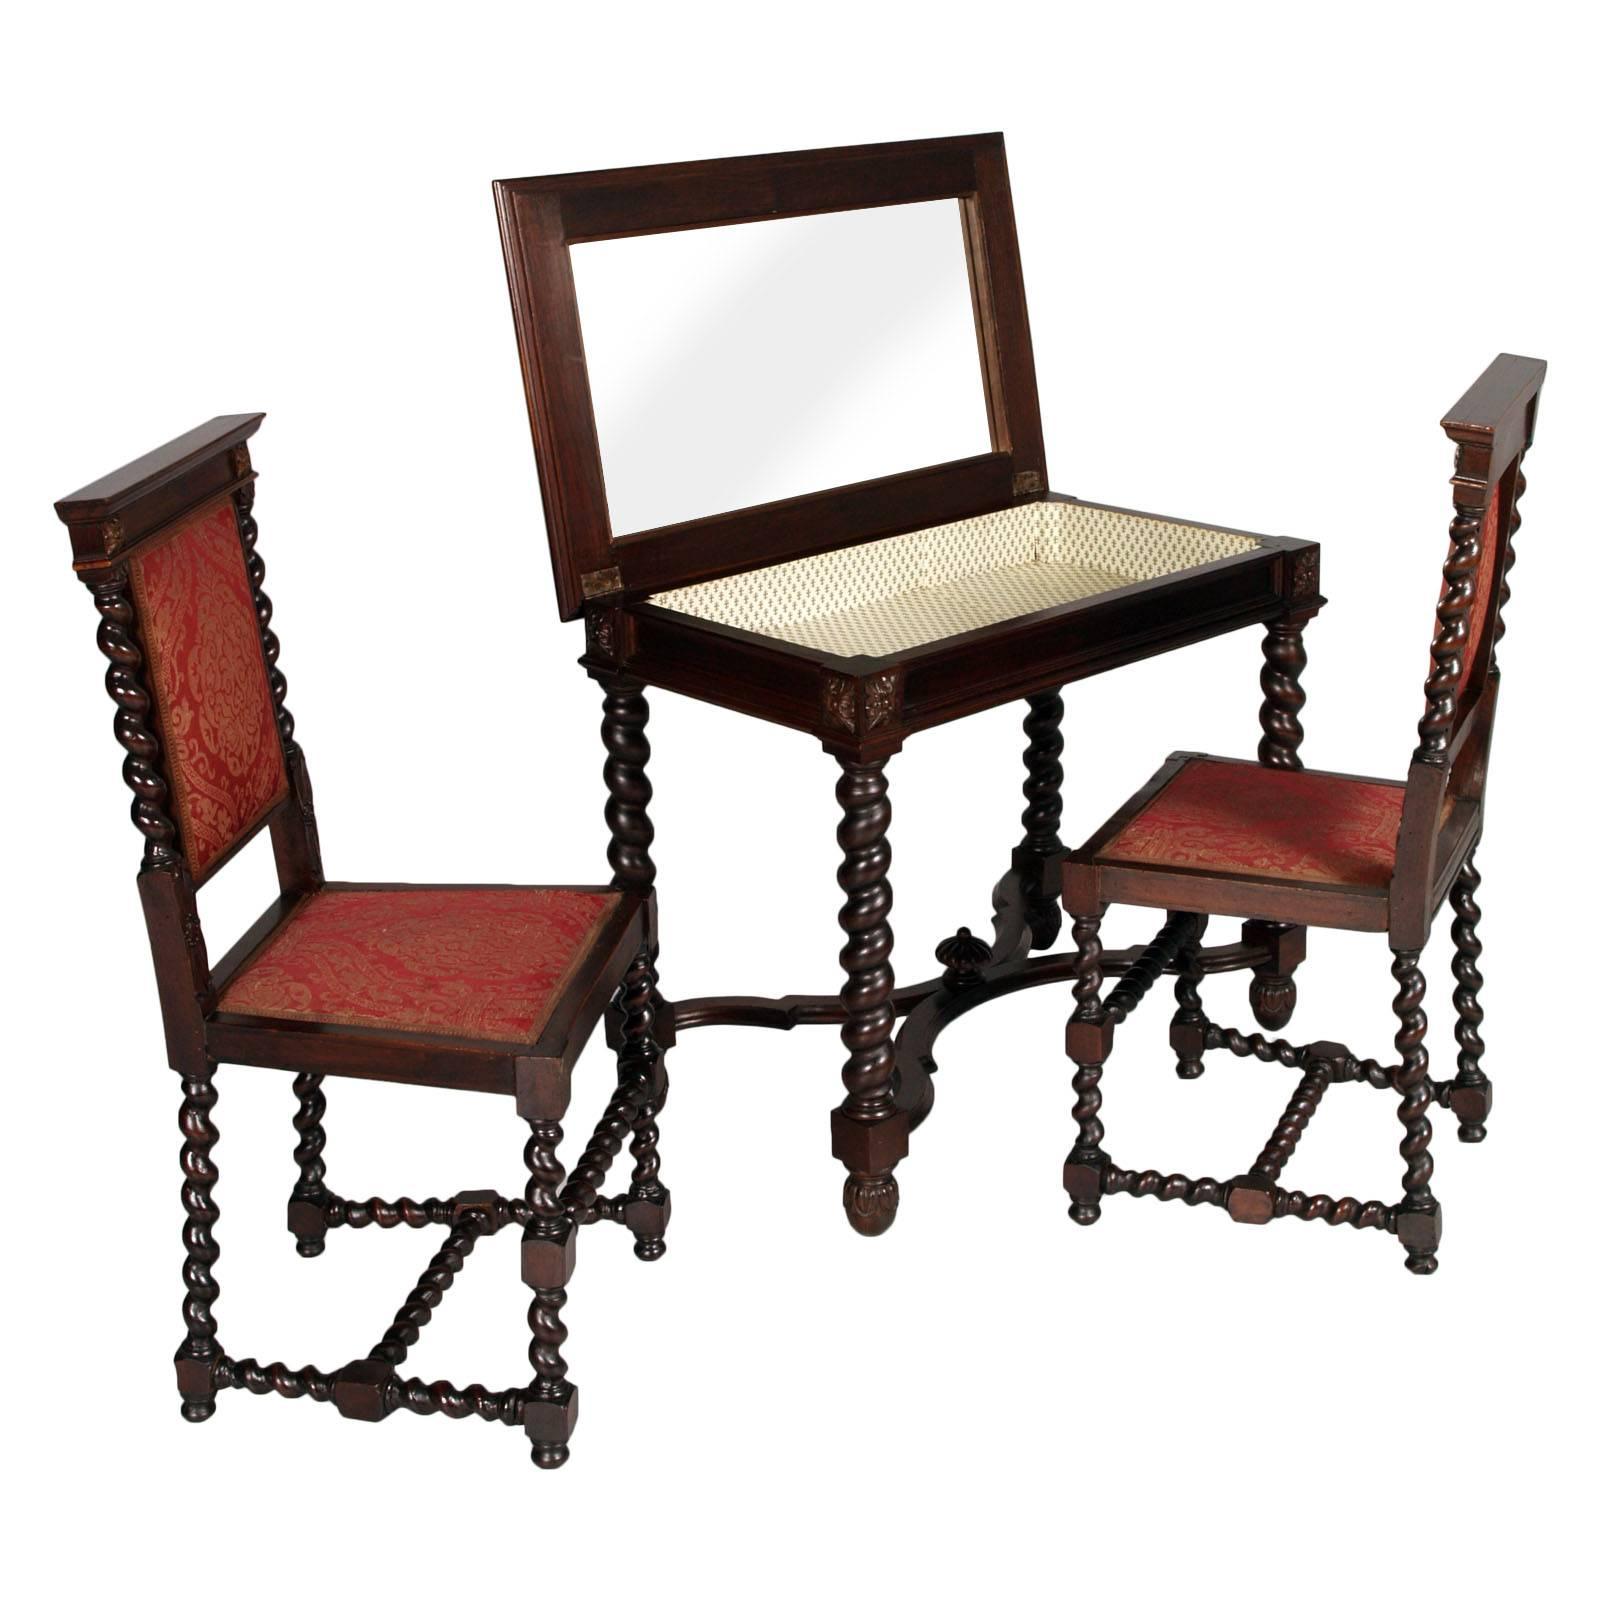 Antique renaissance Vanity, desk with mirror and two chairs in carved ebonized walnut.
Fabulous and elegant dressing table or desk

Measure cm desk: H 73, W 88, D 55
Measure cm chairs: H 100\46 W 45, D 41.